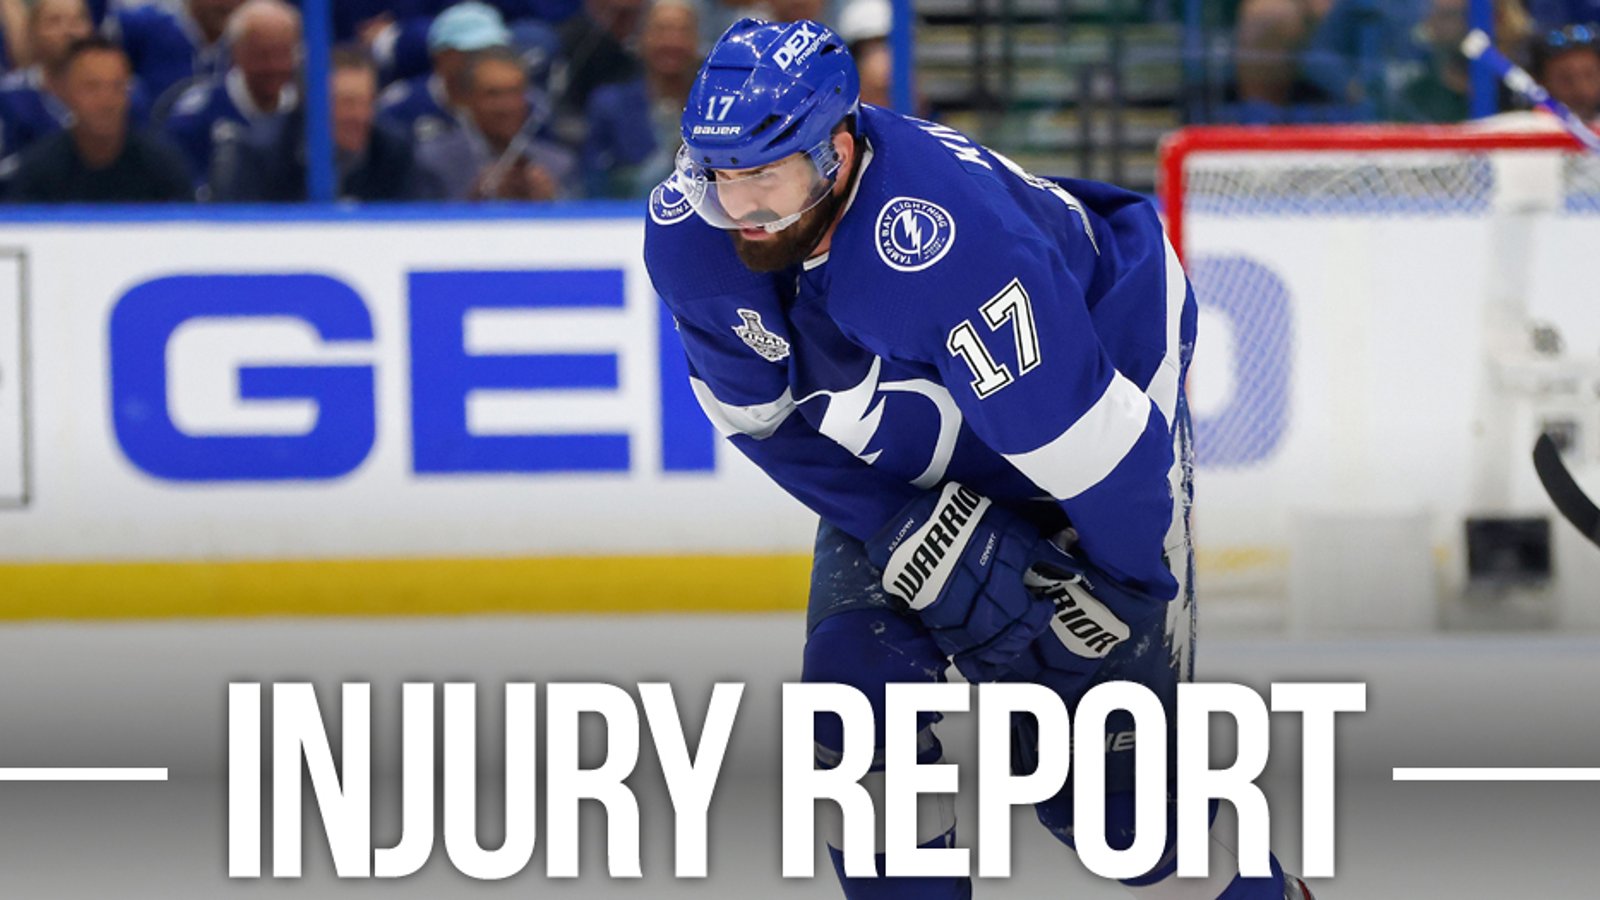 Coach Cooper provides an update on Alex Killorn for Game 3